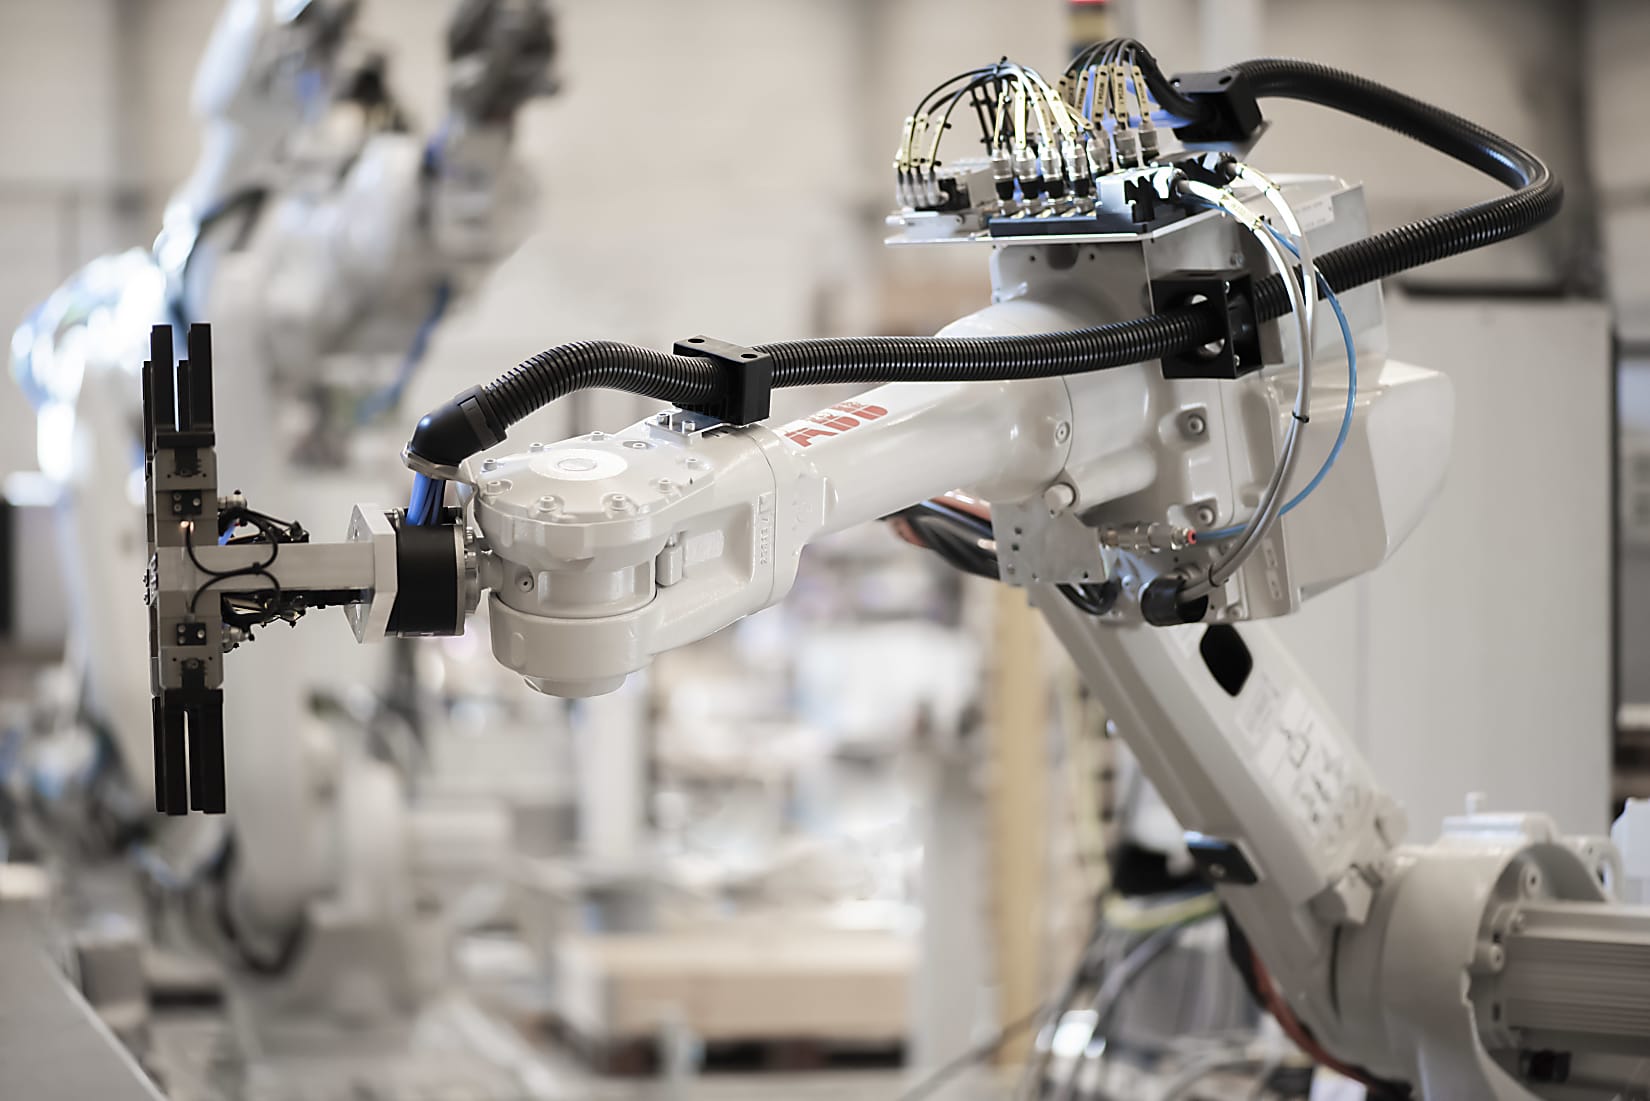 Connecting robot accessories to any industrial network